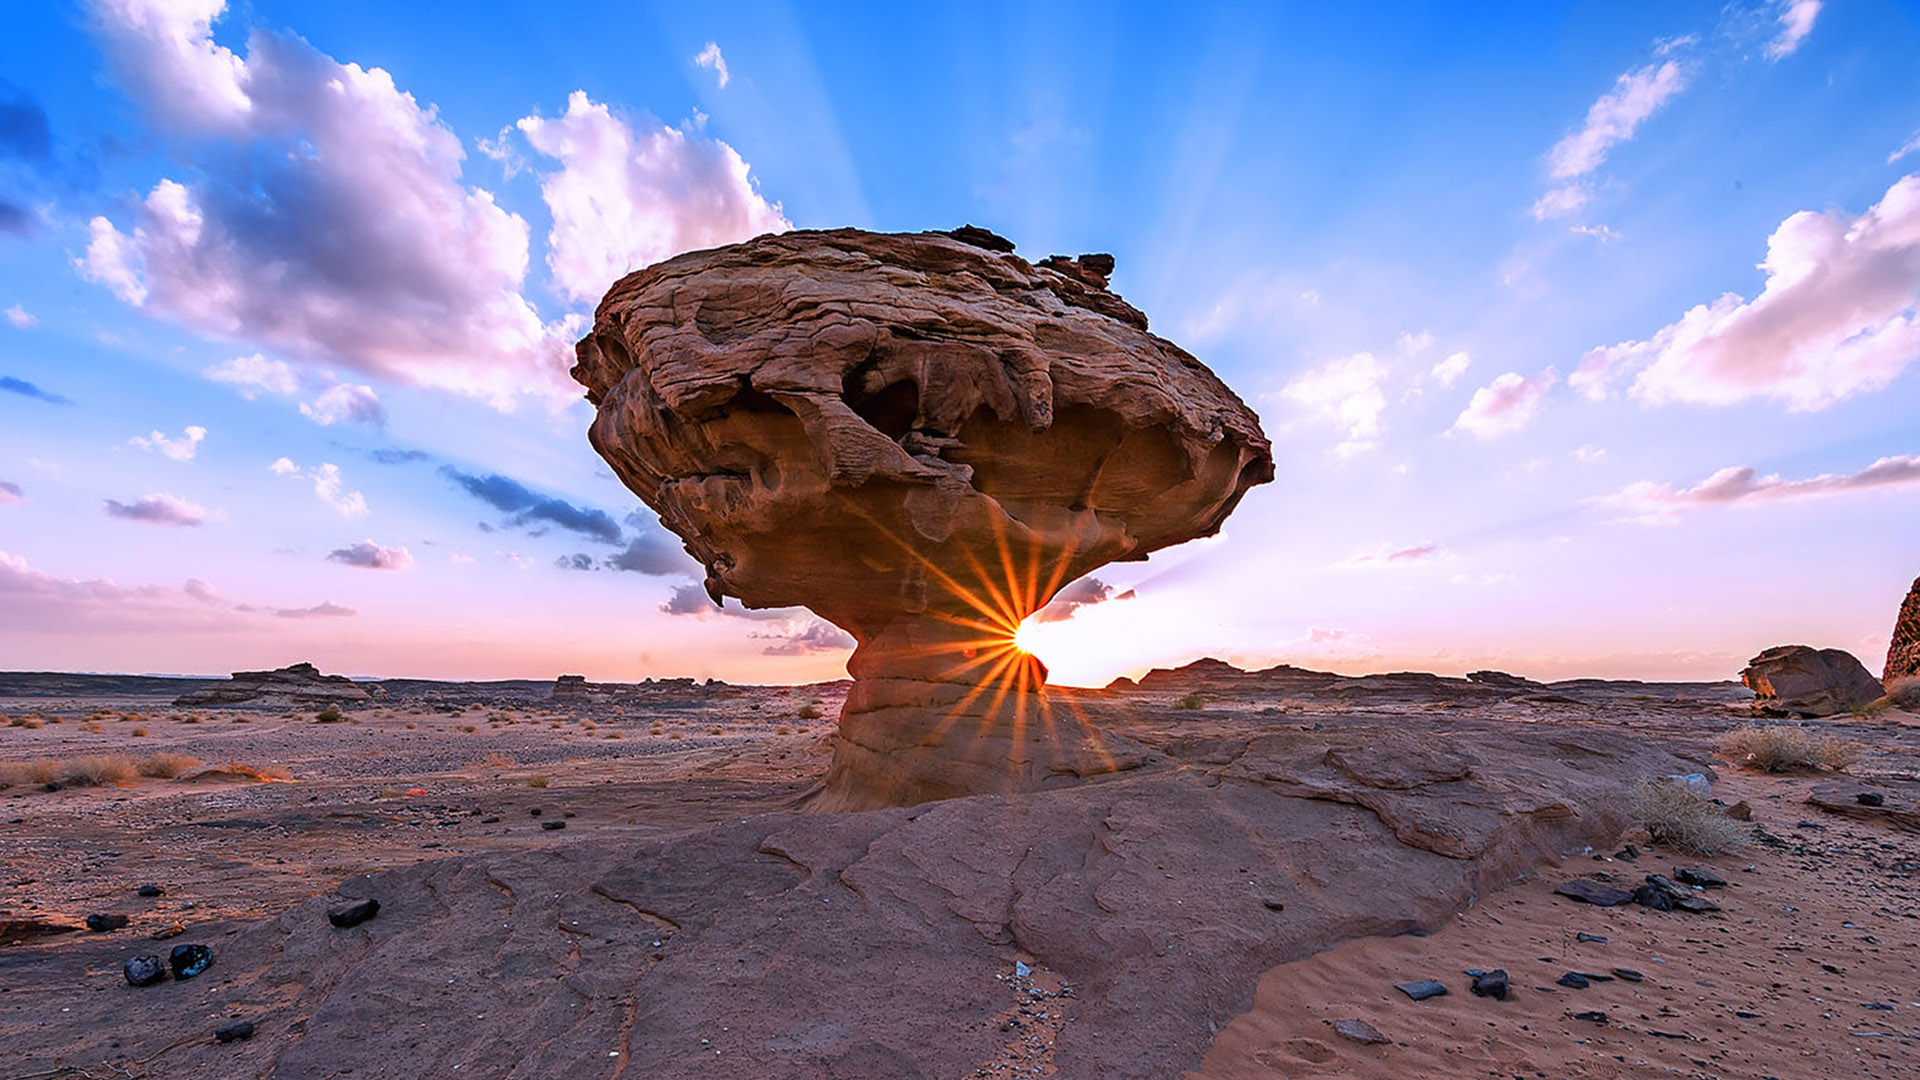 Things to do in AlUla- Rock outcroping in AlUla- Image Credit- visitsaudi.com